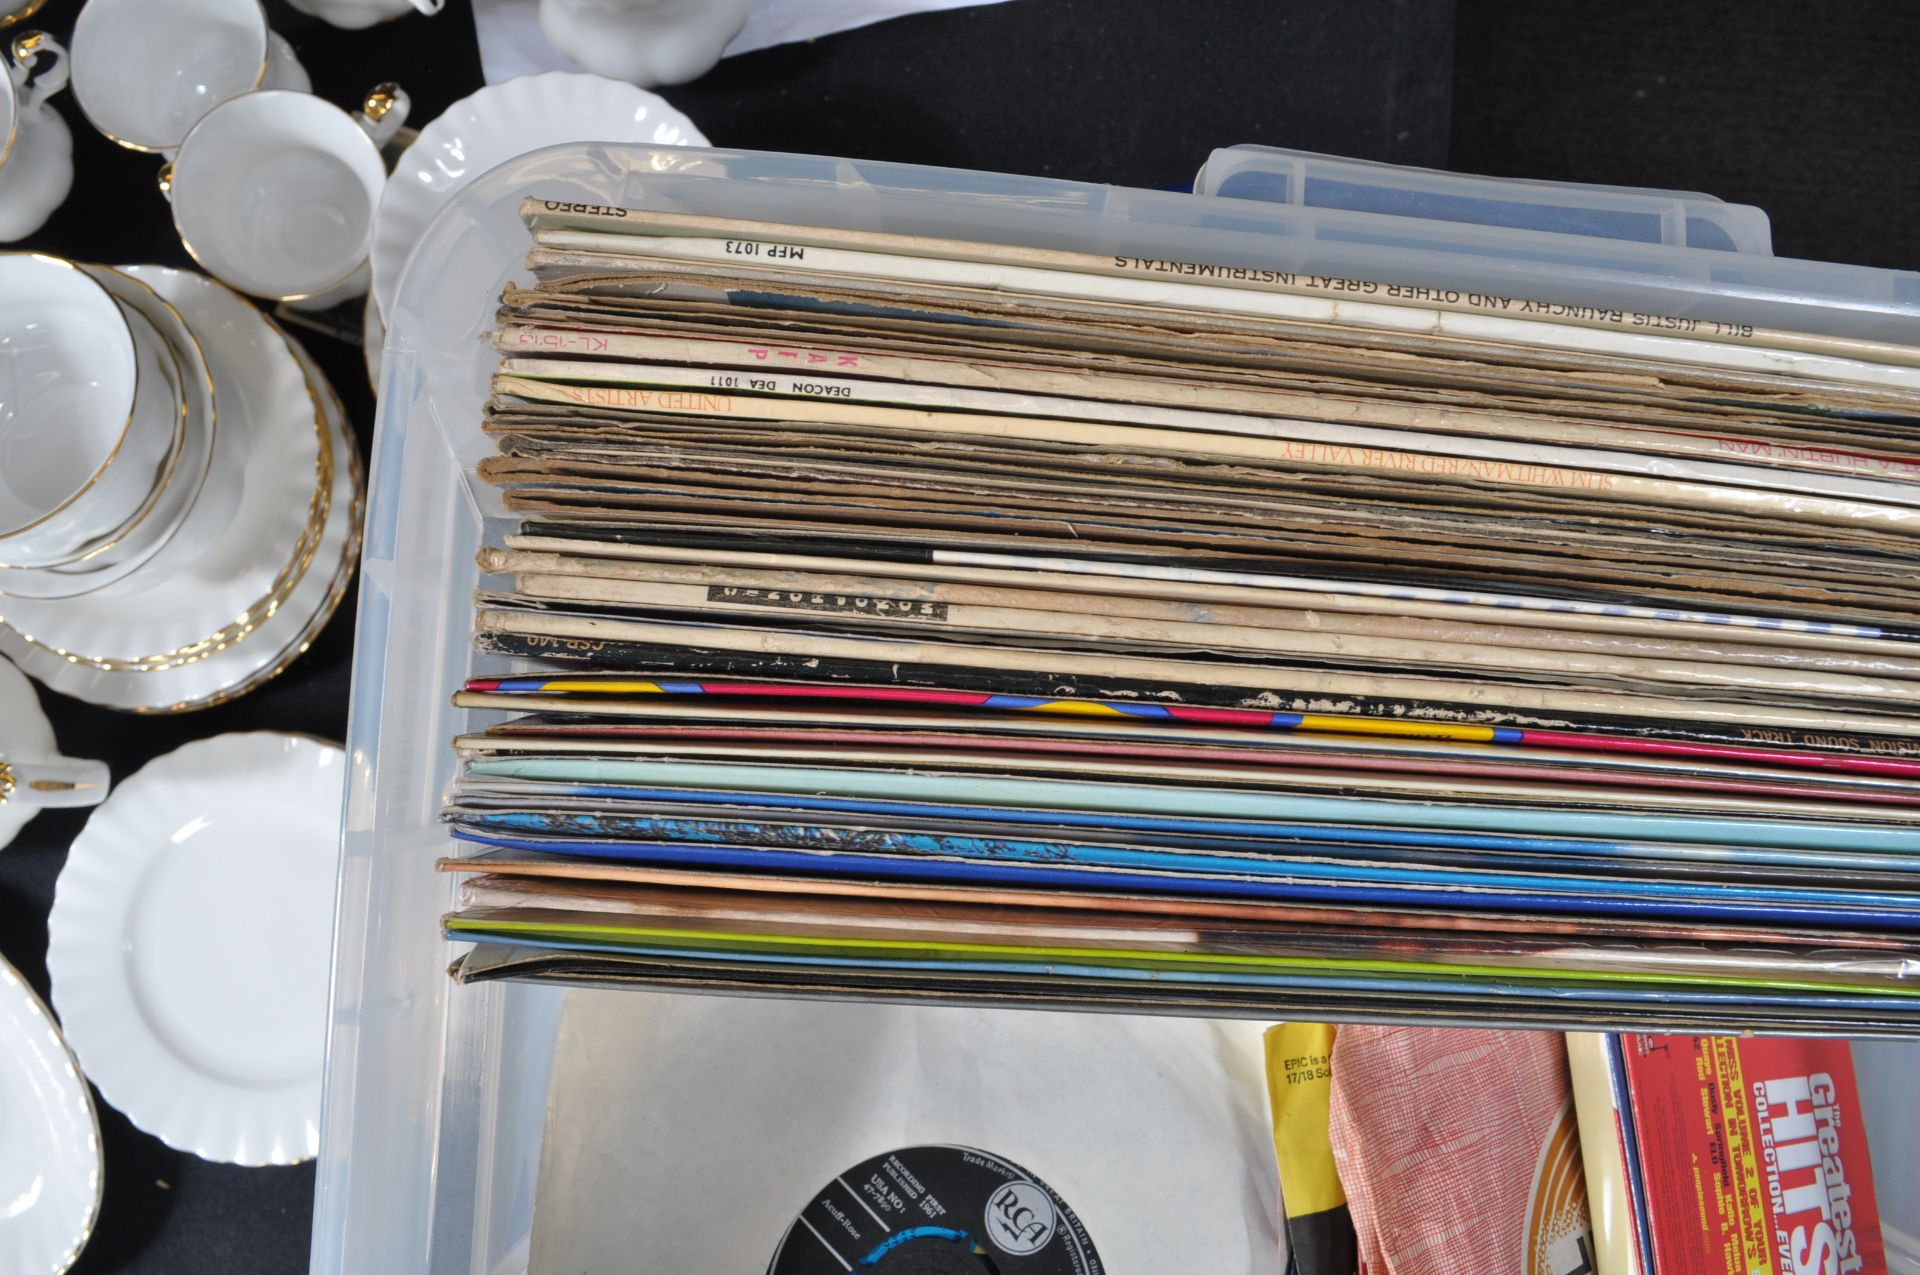 LARGE COLLECTION OF LP’S VINYL 45RPM RECORDS - Image 4 of 6